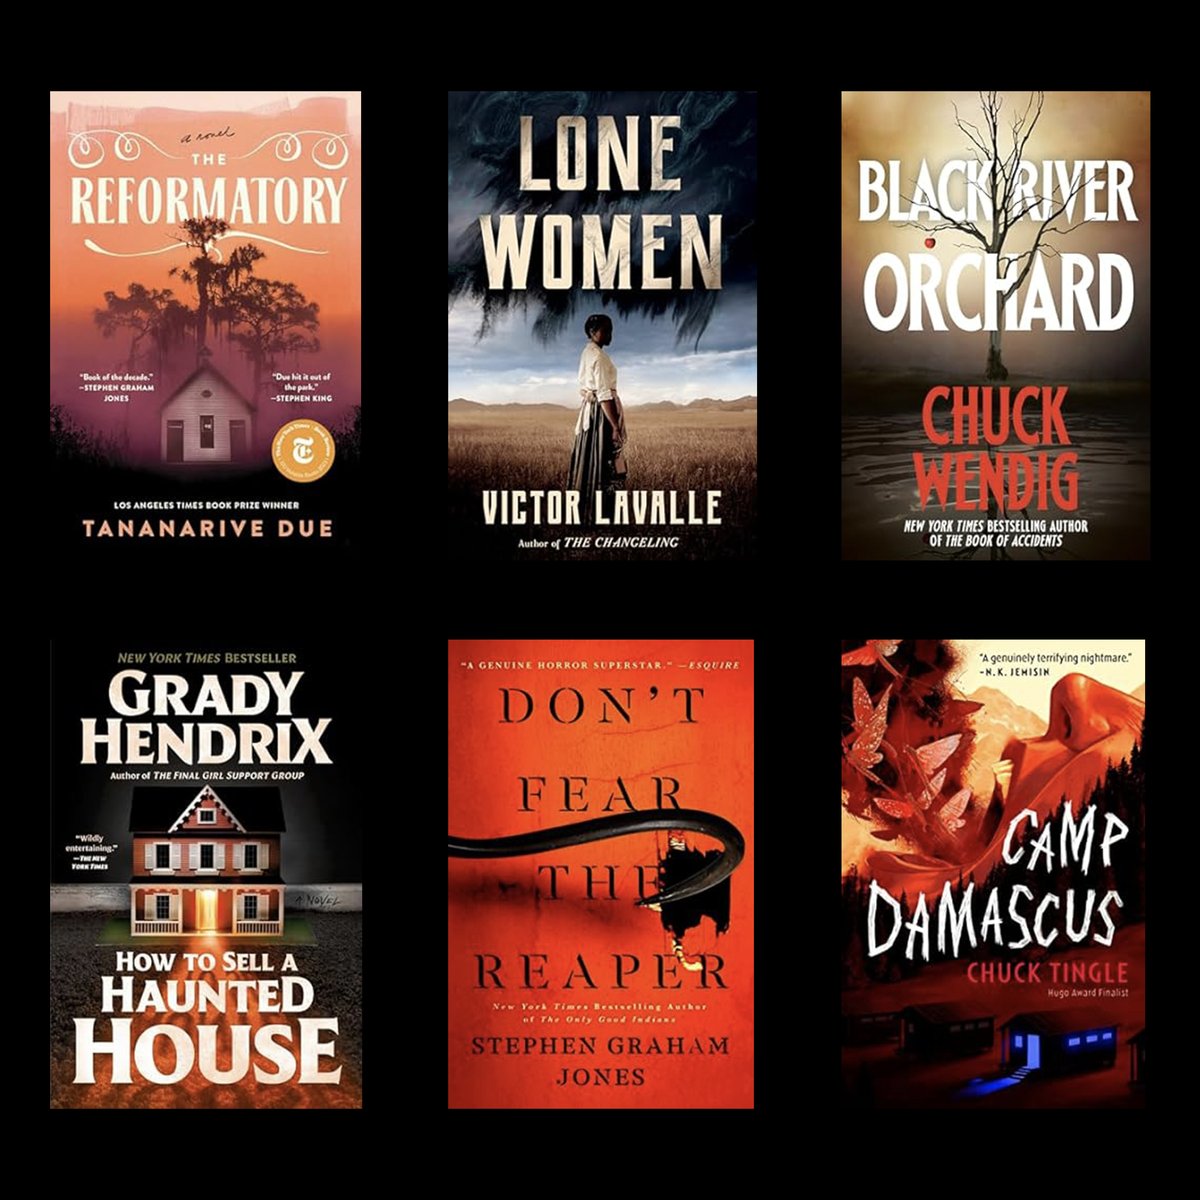 STOKER AWARDS this weekend. it is incredible honor to be nominated for BEST HORROR NOVEL of the year regardless, but i am especially moved to be highlighted next to these authors who all prove love. SIX AMAZING BOOKS THAT HAVE ALL CHANGED THIS TIMELINE IN THEIR OWN UNIQUE WAY